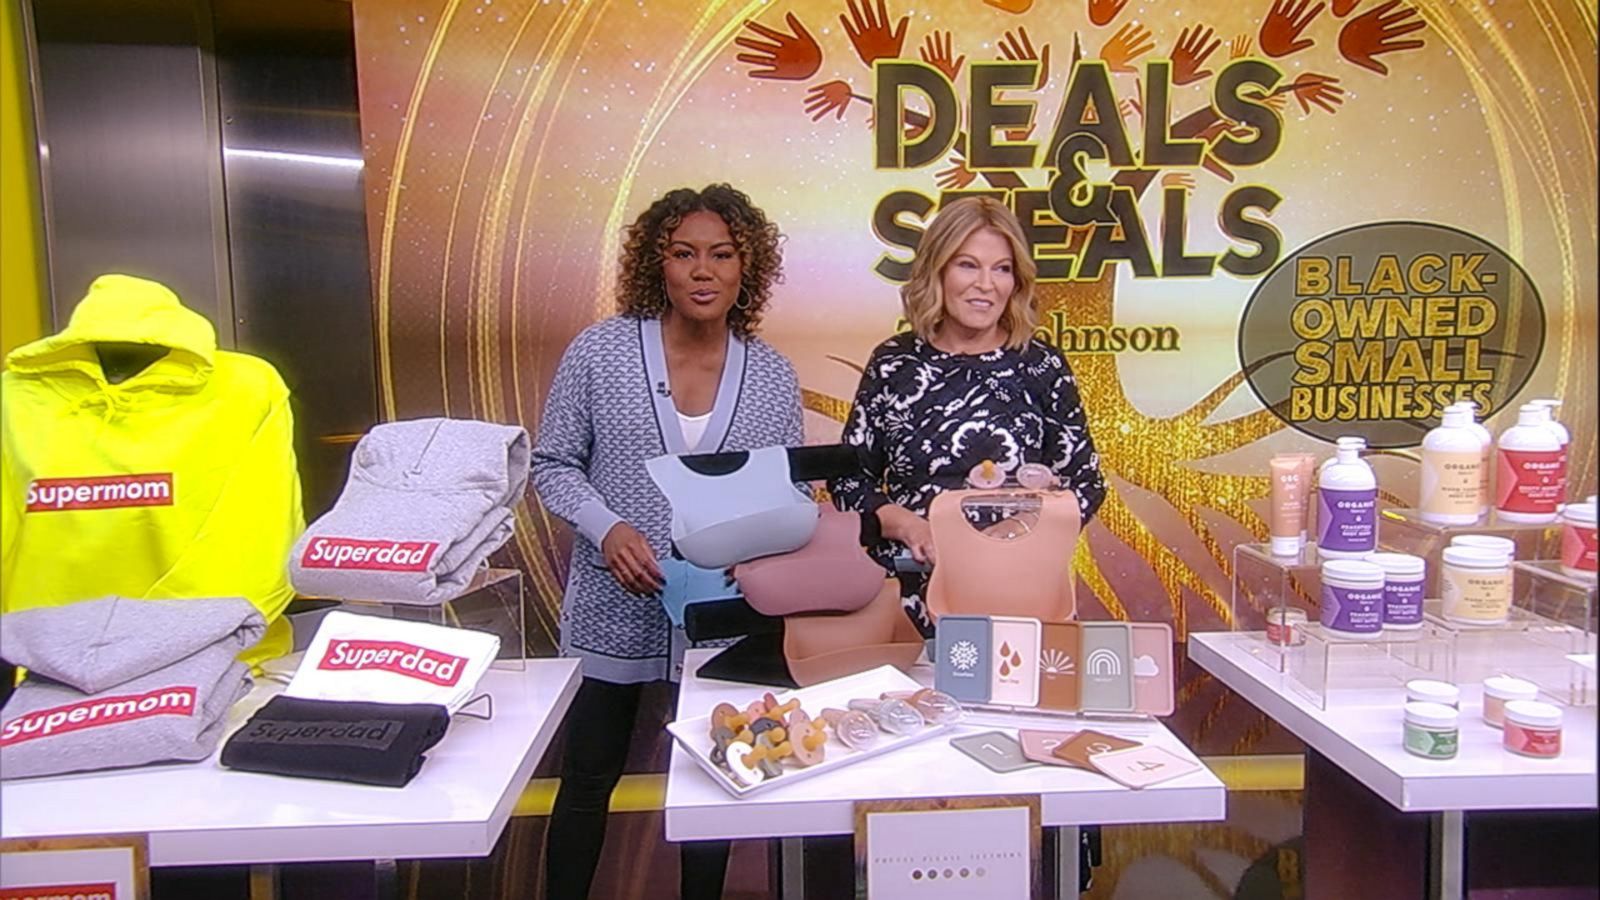 'Deals and Steals' highlights Blackowned small businesses Good